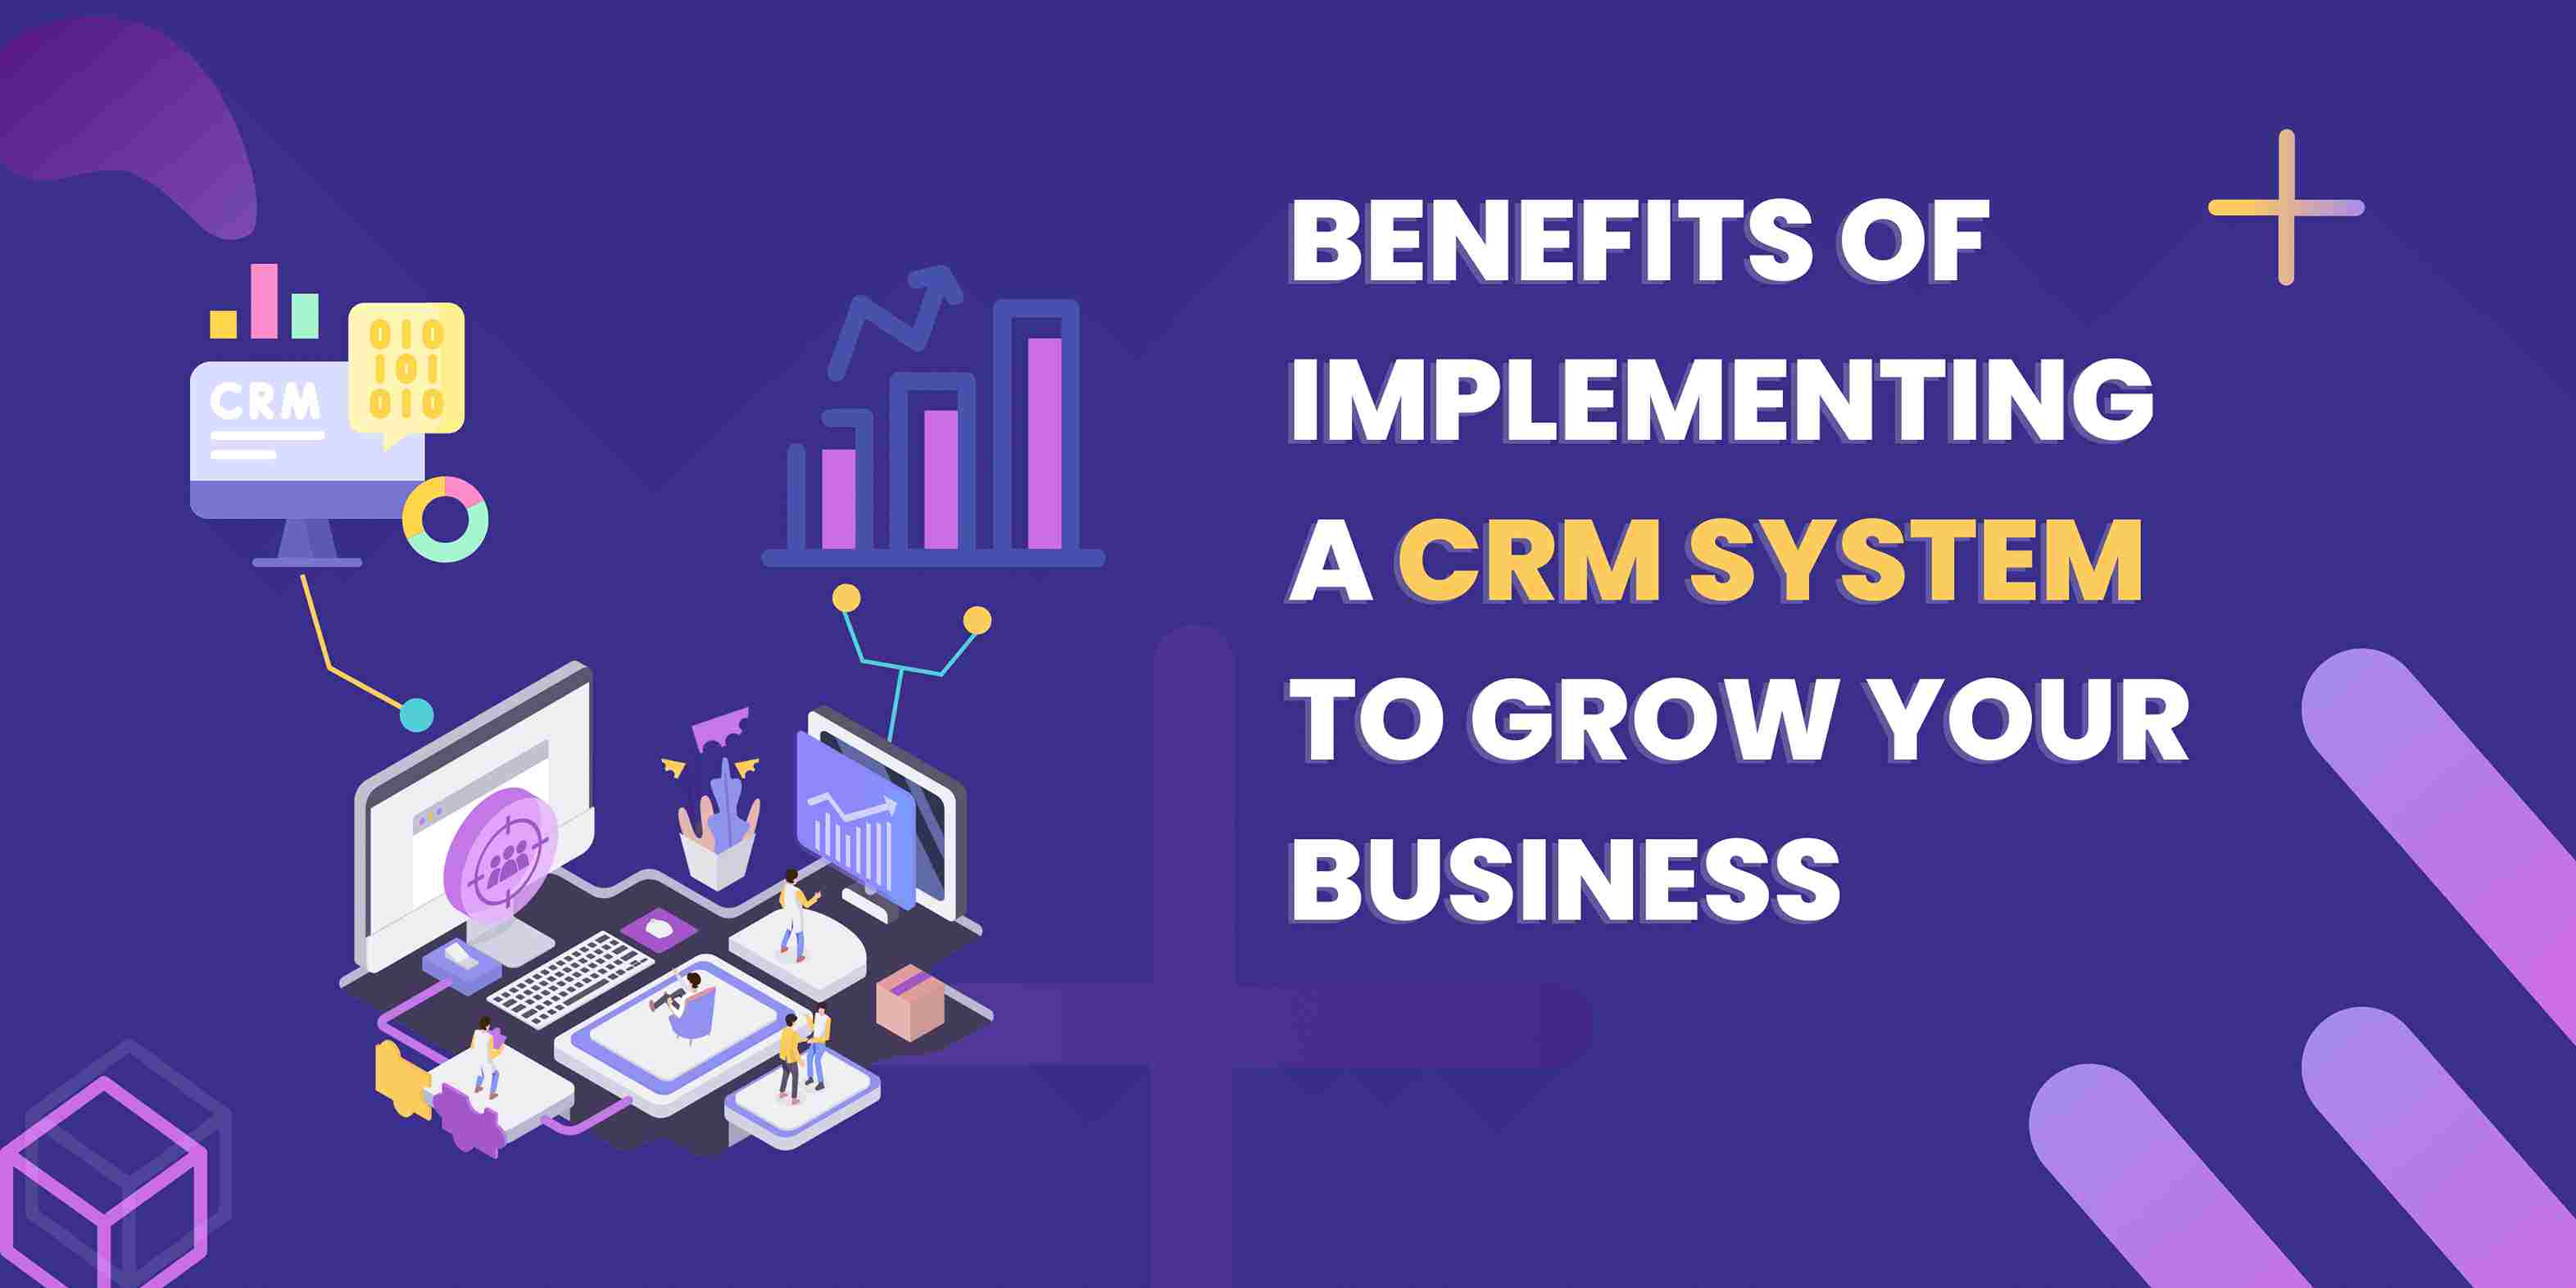 Blog image featuring the benefits of implementing CRM to your Business